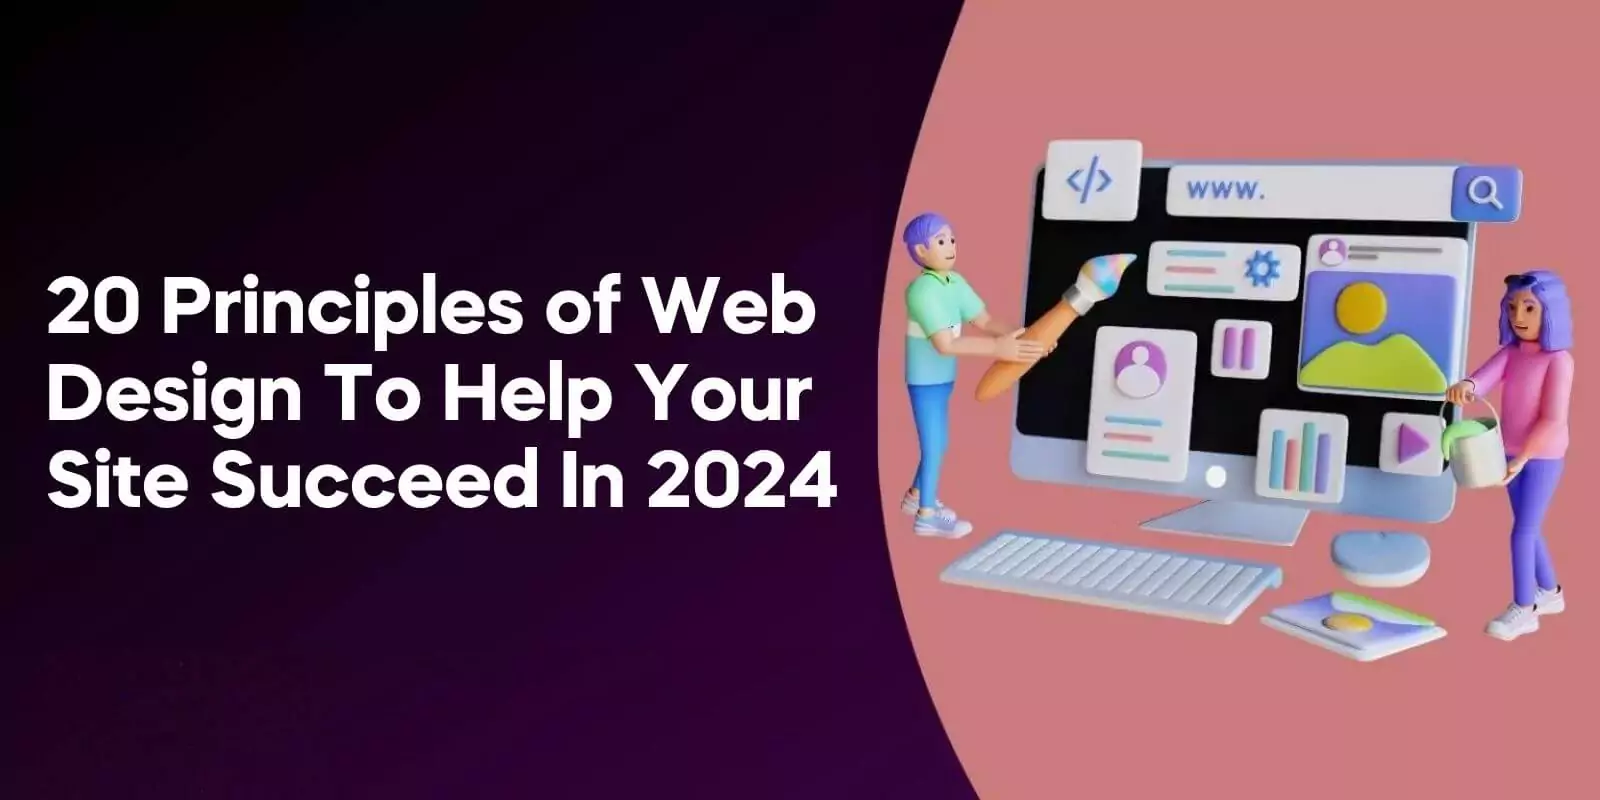 20 Principles of Web Design To Help Your Site Succeed in 2024